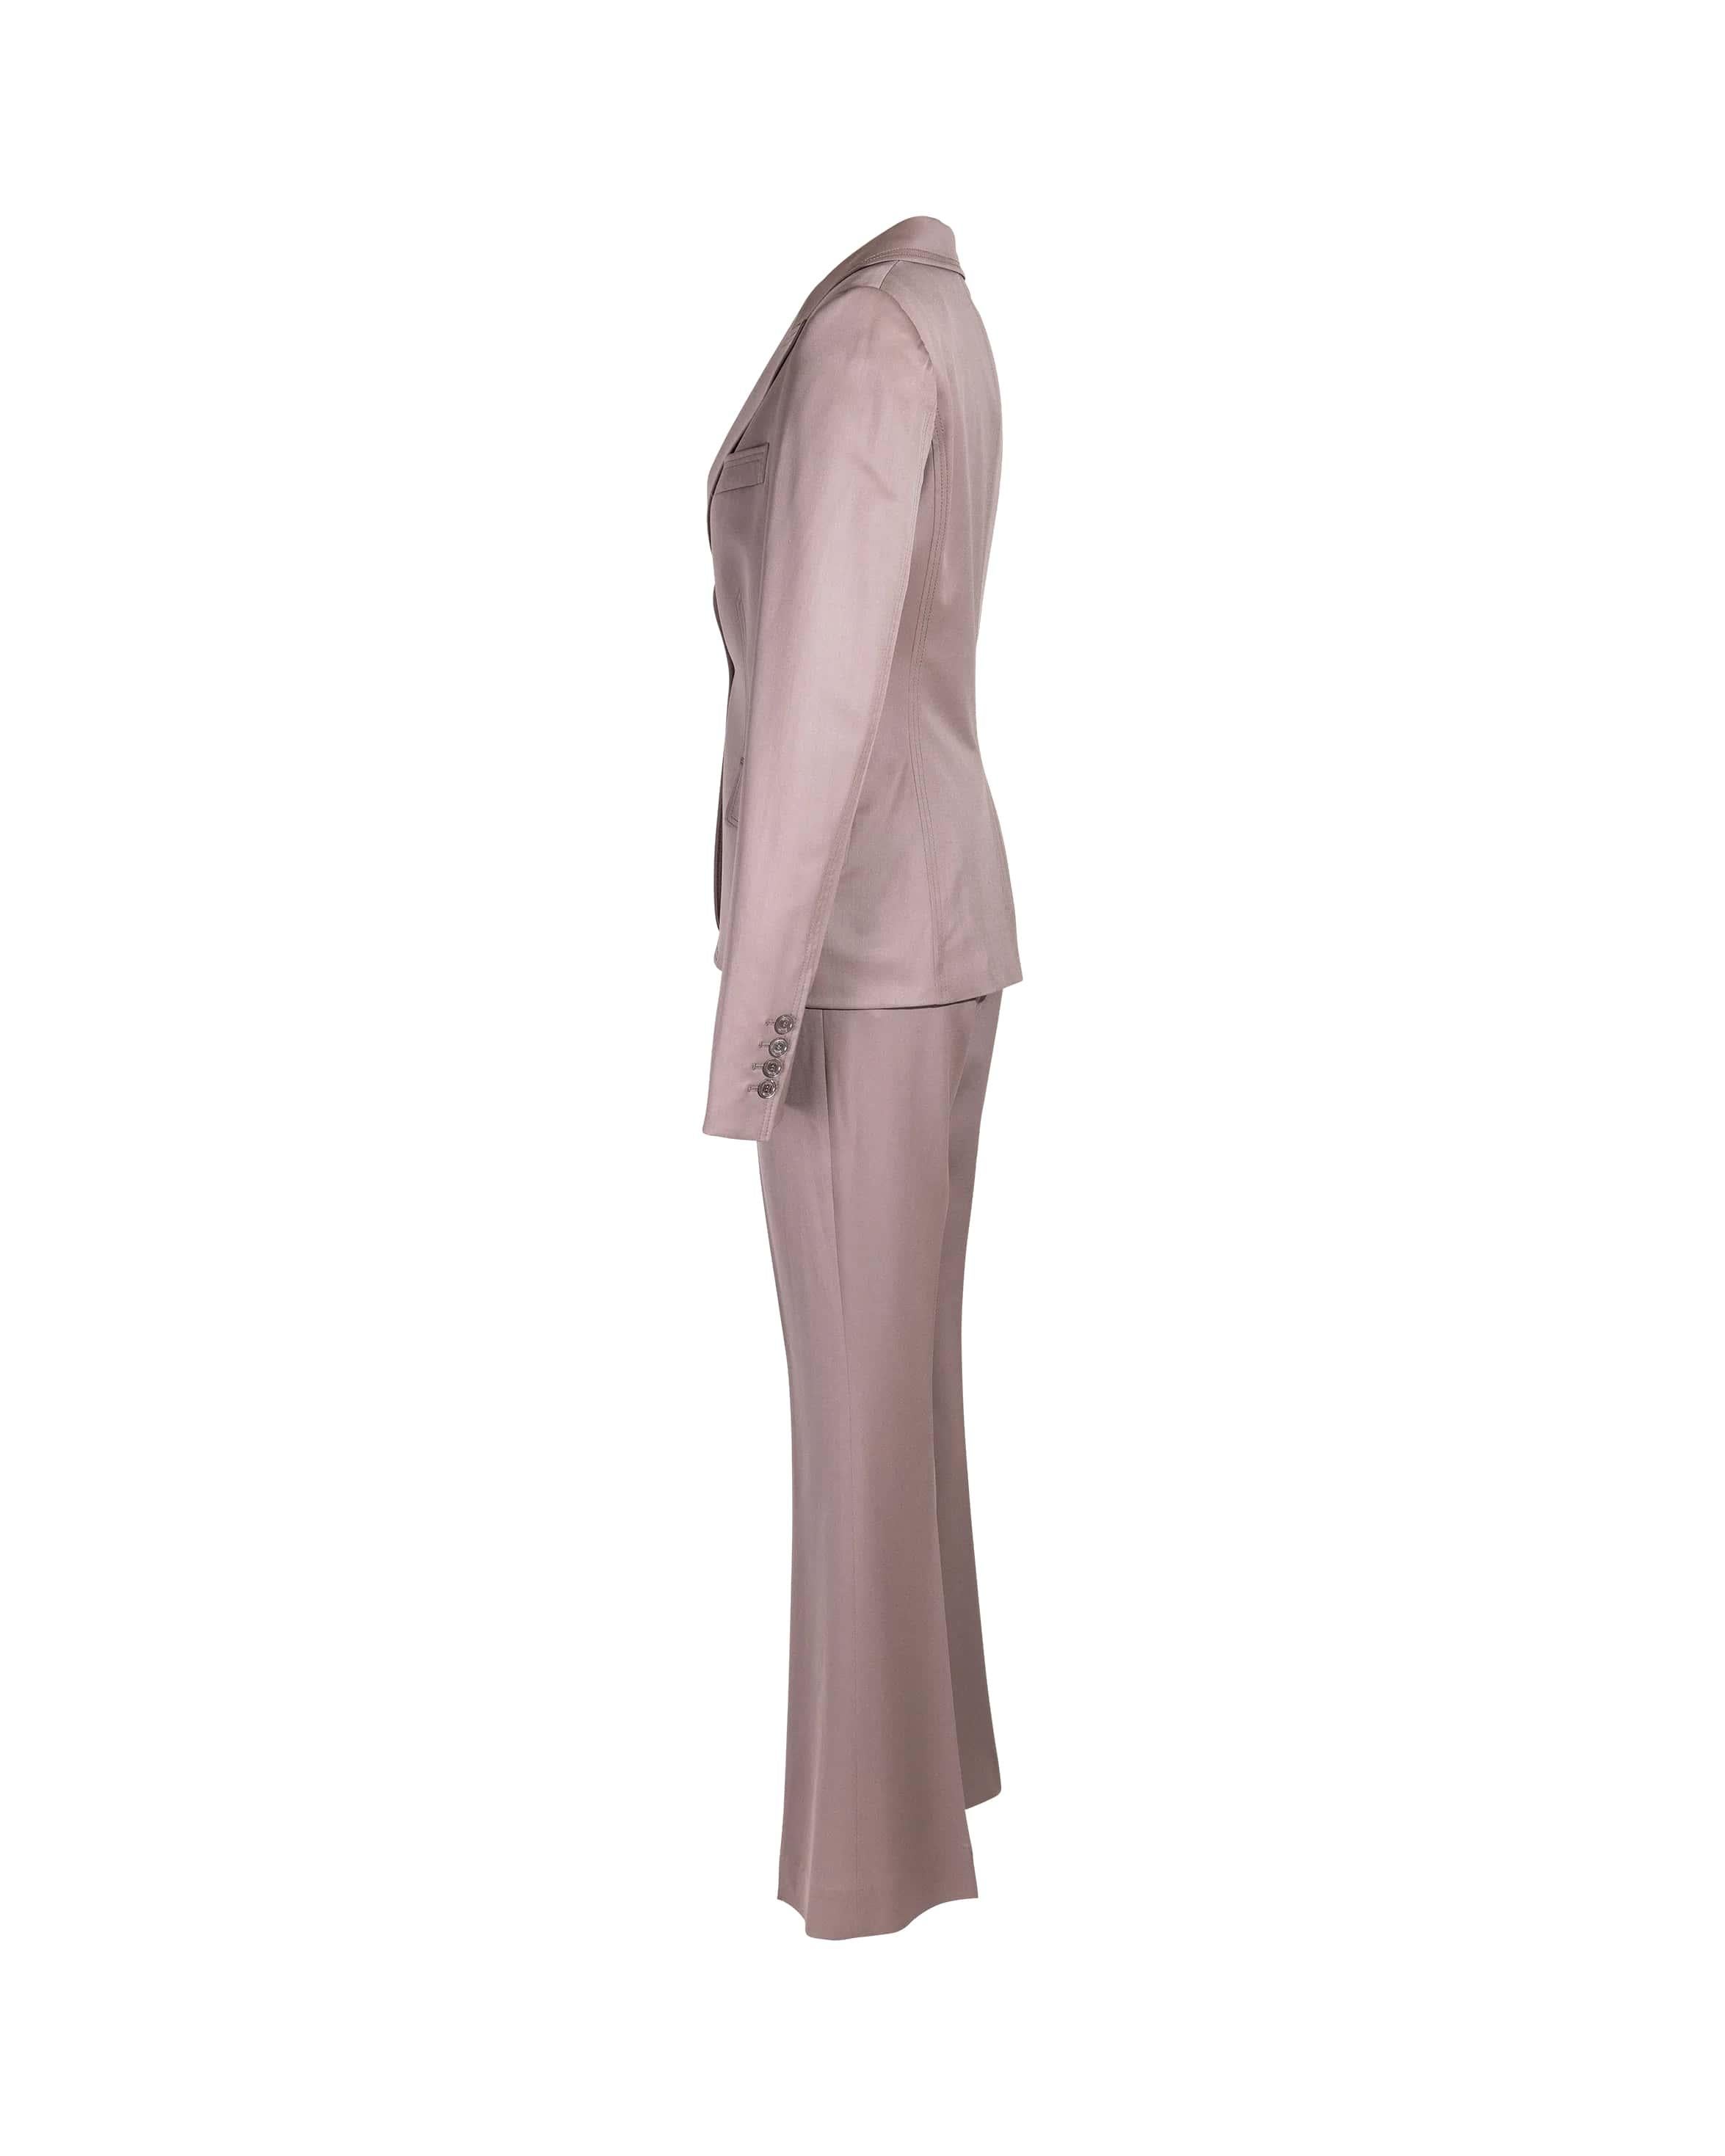 c. 2004 Gucci by Tom Ford beige wool blend pant suit set. Fitted double-stitched blazer with single button and flap pocket details. Blazer has slight padding at shoulders. Classic mid-rise trouser with functional side pockets.